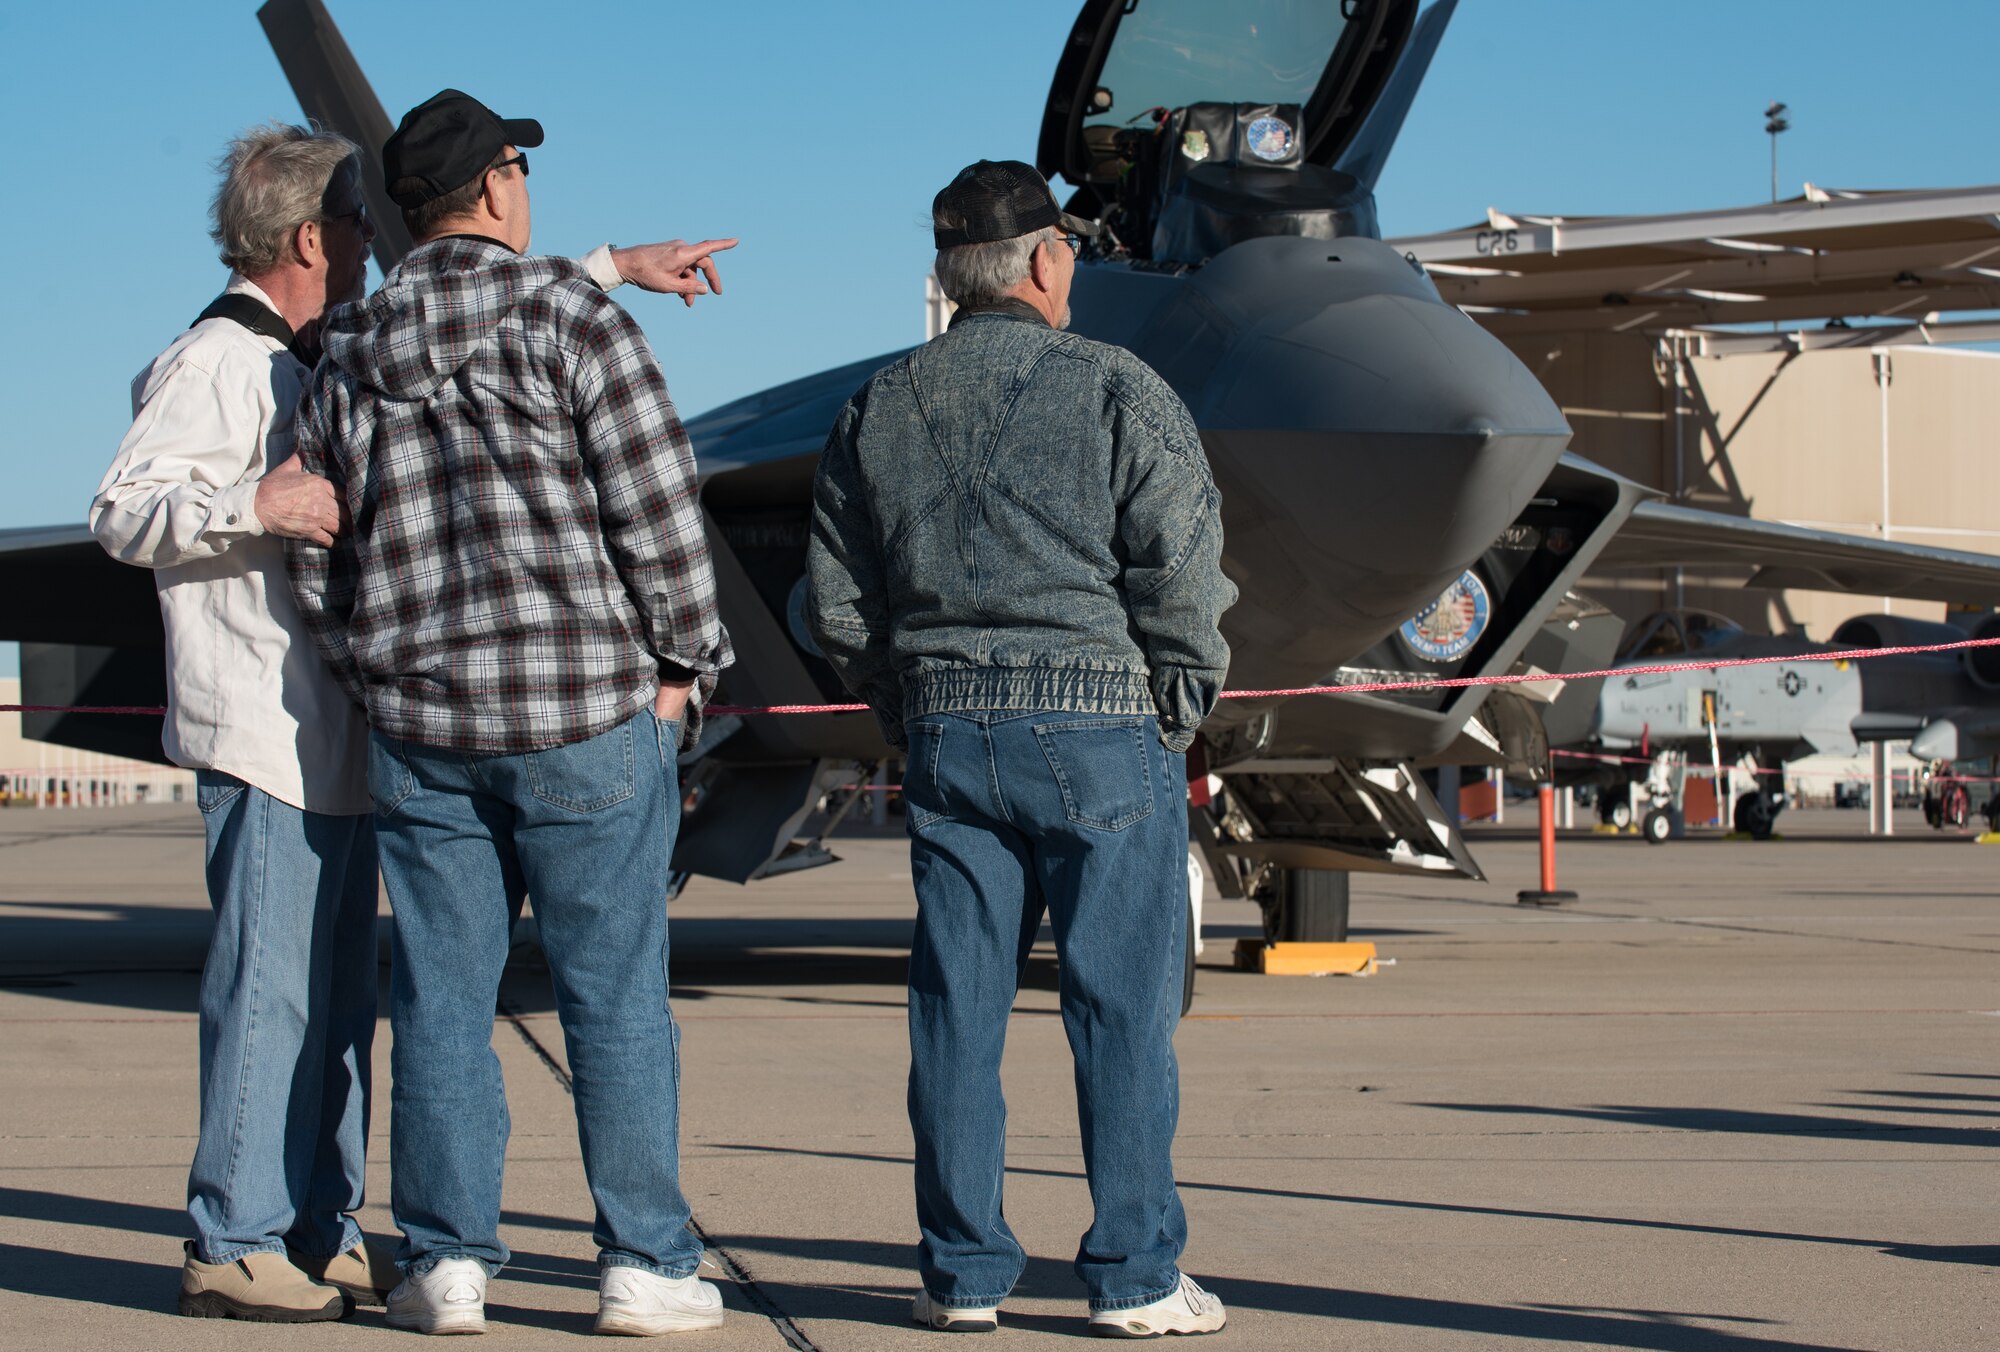 U.S. Air Force Heritage Flight Training Course spectators visit the Air Combat Command F-22 Raptor Demonstration Team before the Raptor team’s flight at Davis-Monthan Air Force Base, Arizona, March 2, 2017.